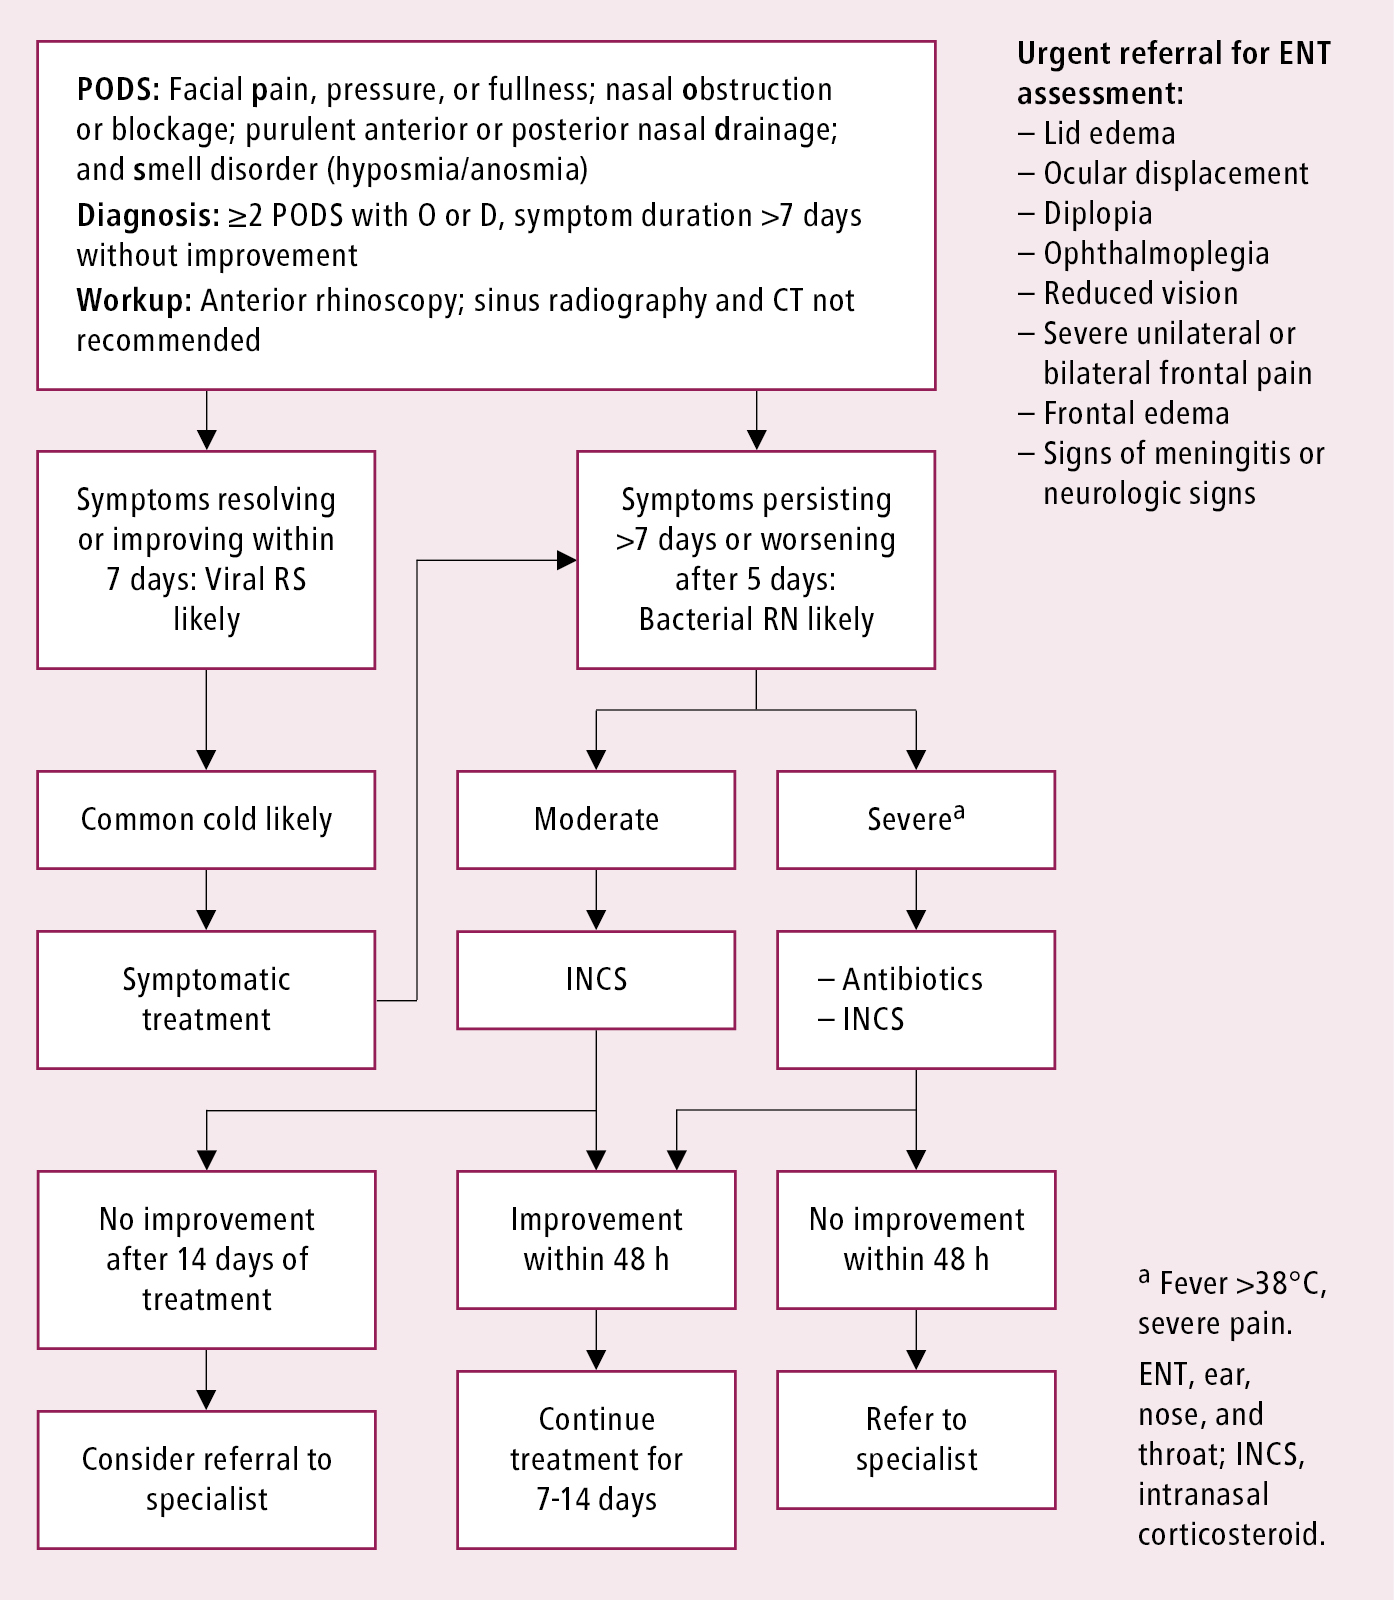 Figure 031_7296.  Management algorithm of adults with acute rhinosinusitis.  Adapted from    Rhinology. 2012 Mar;50(1):1-12   .  